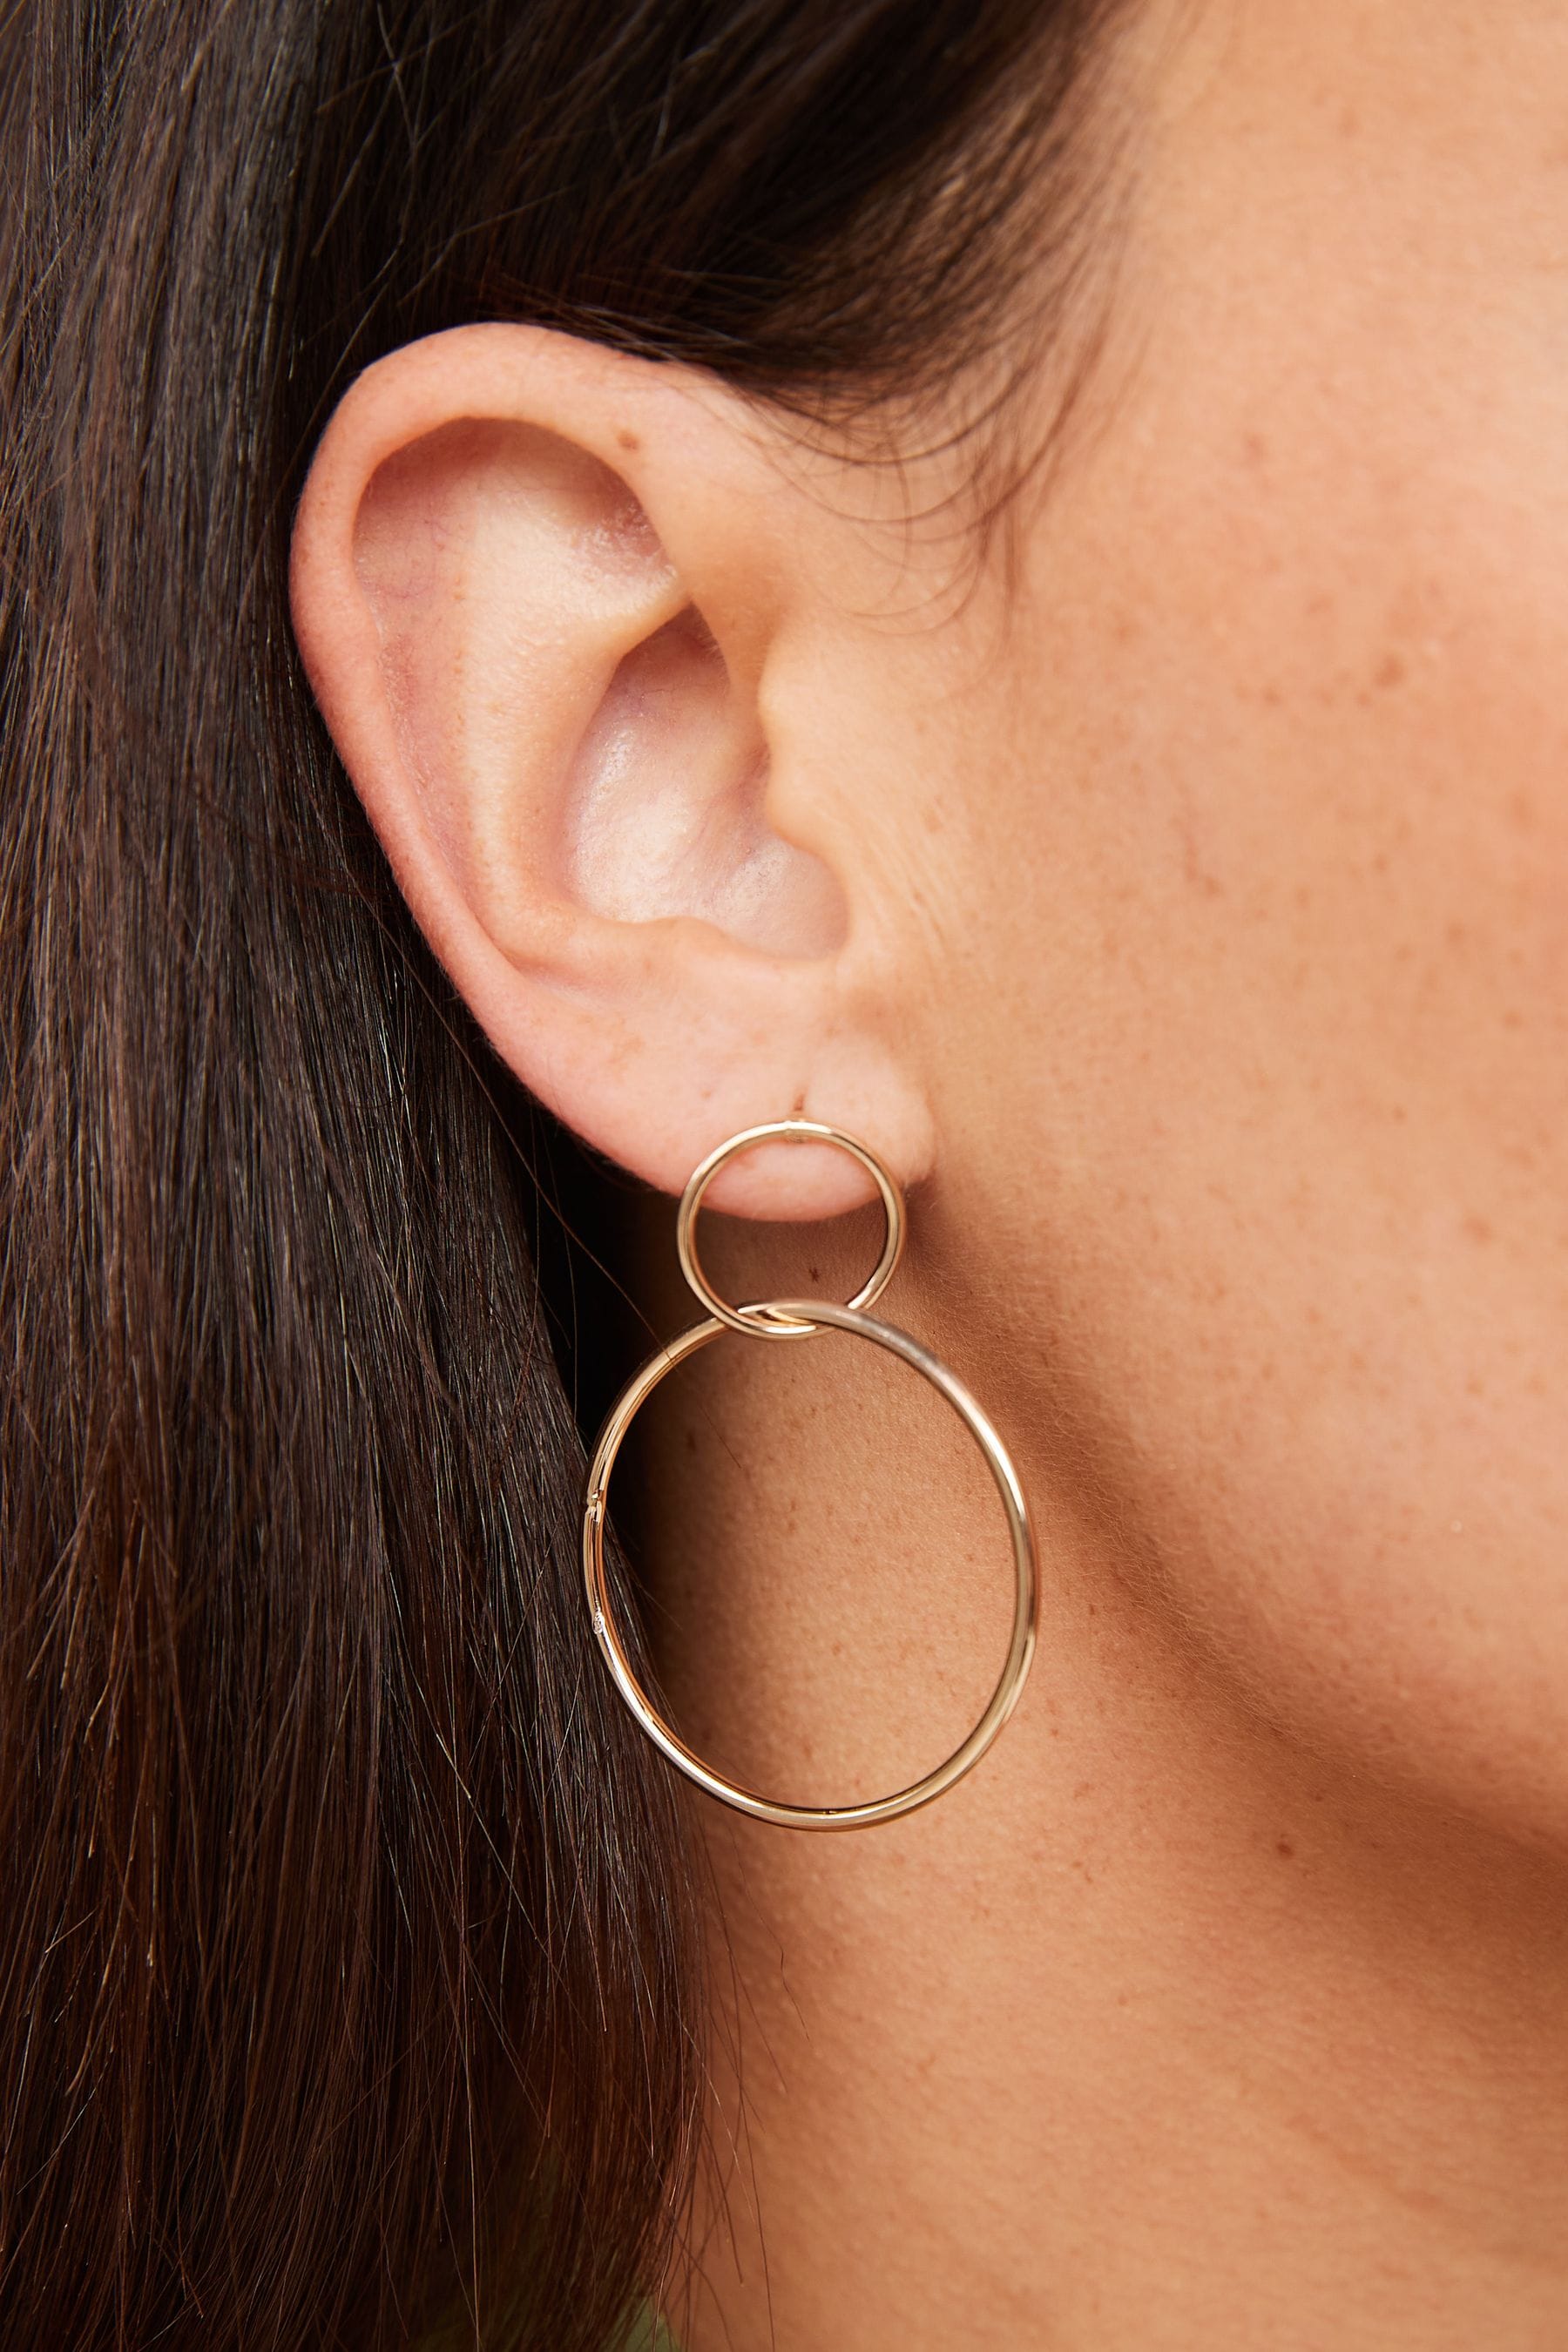 Buy Circle Drop Earrings from the Next UK online shop